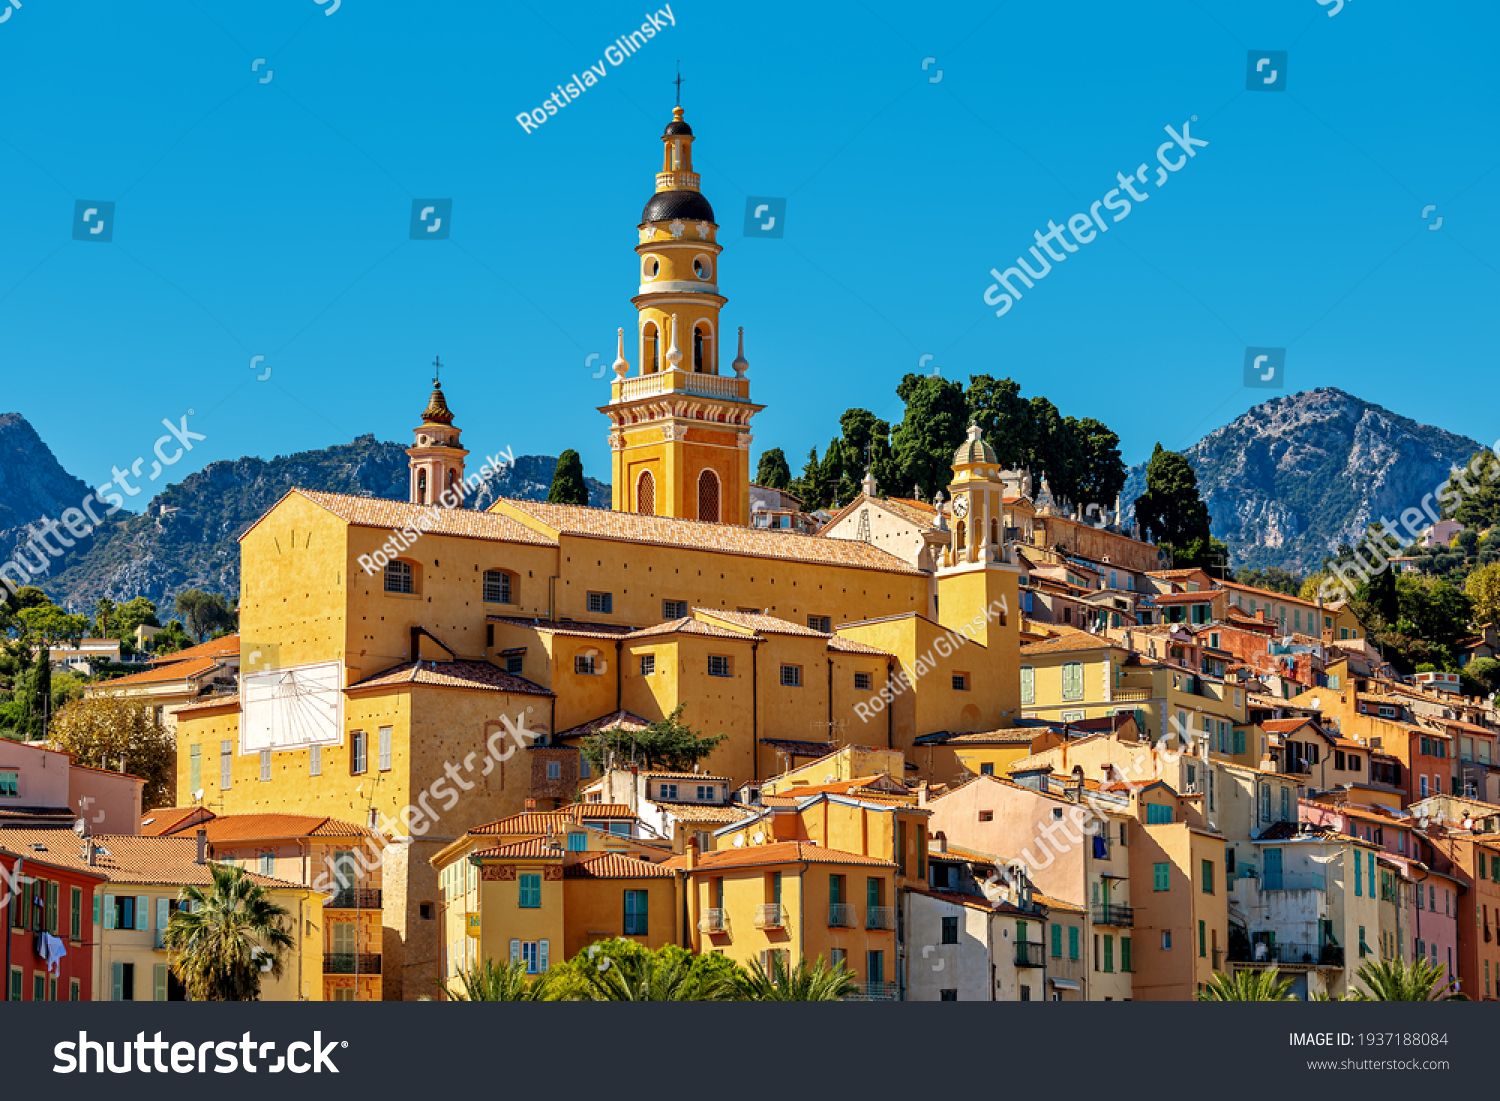 View of colorful houses and belfry of the Saint Michel Archange basilica in old town of Menton - small town on French Riviera. #1937188084